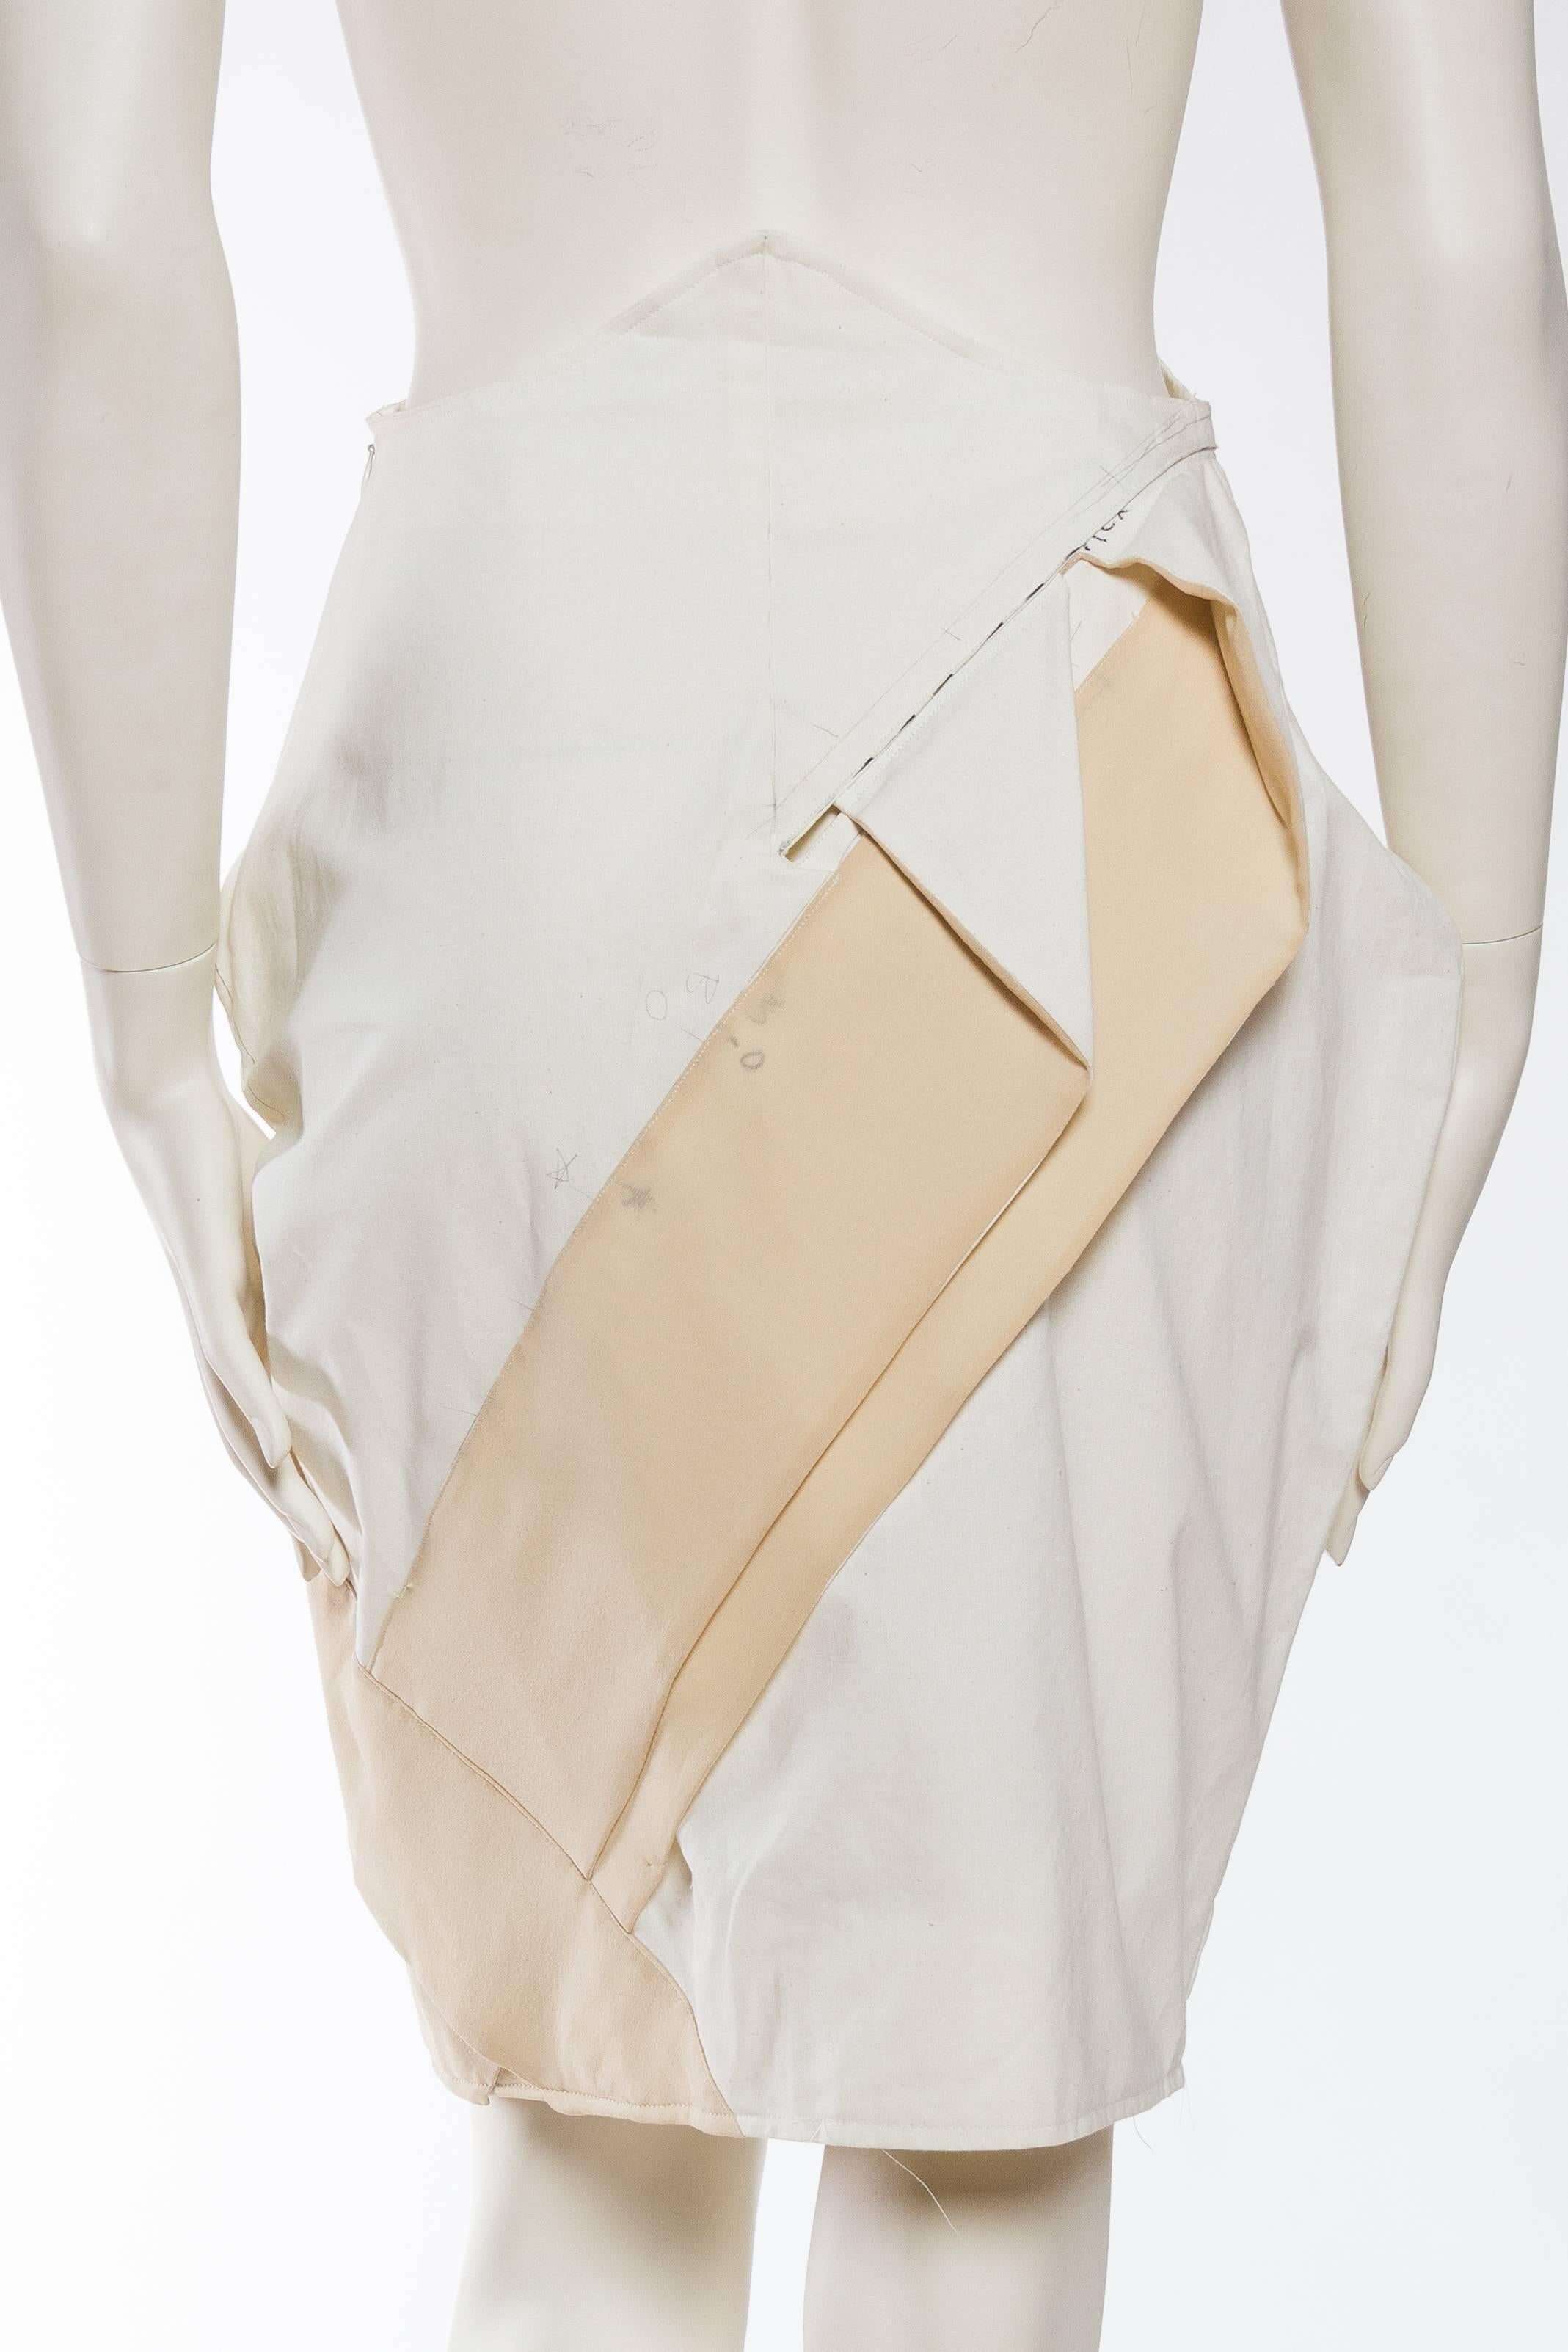 2000S JOHN GALLIANO Working Muslin Sample Skirt From Galliano's Archive For Sale 2